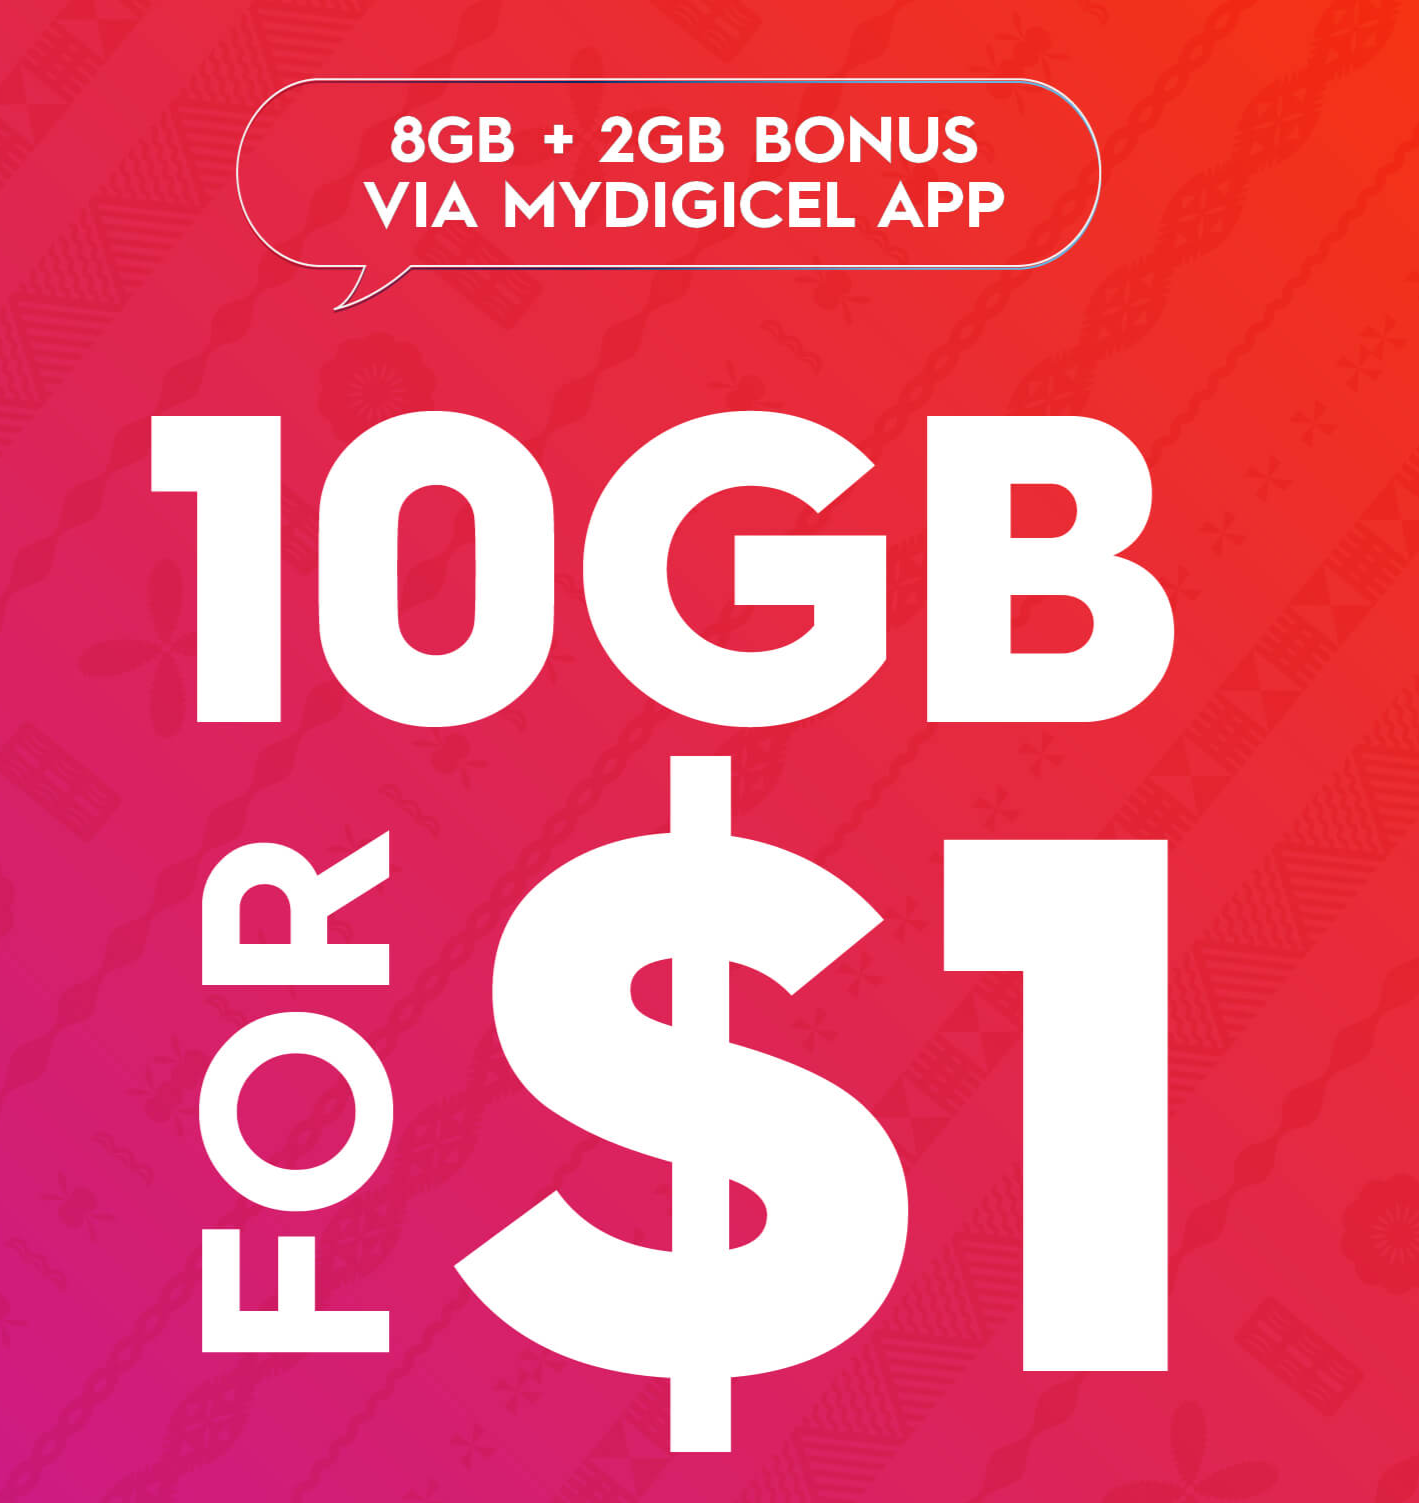 A red background, with the text "10GB for $1"